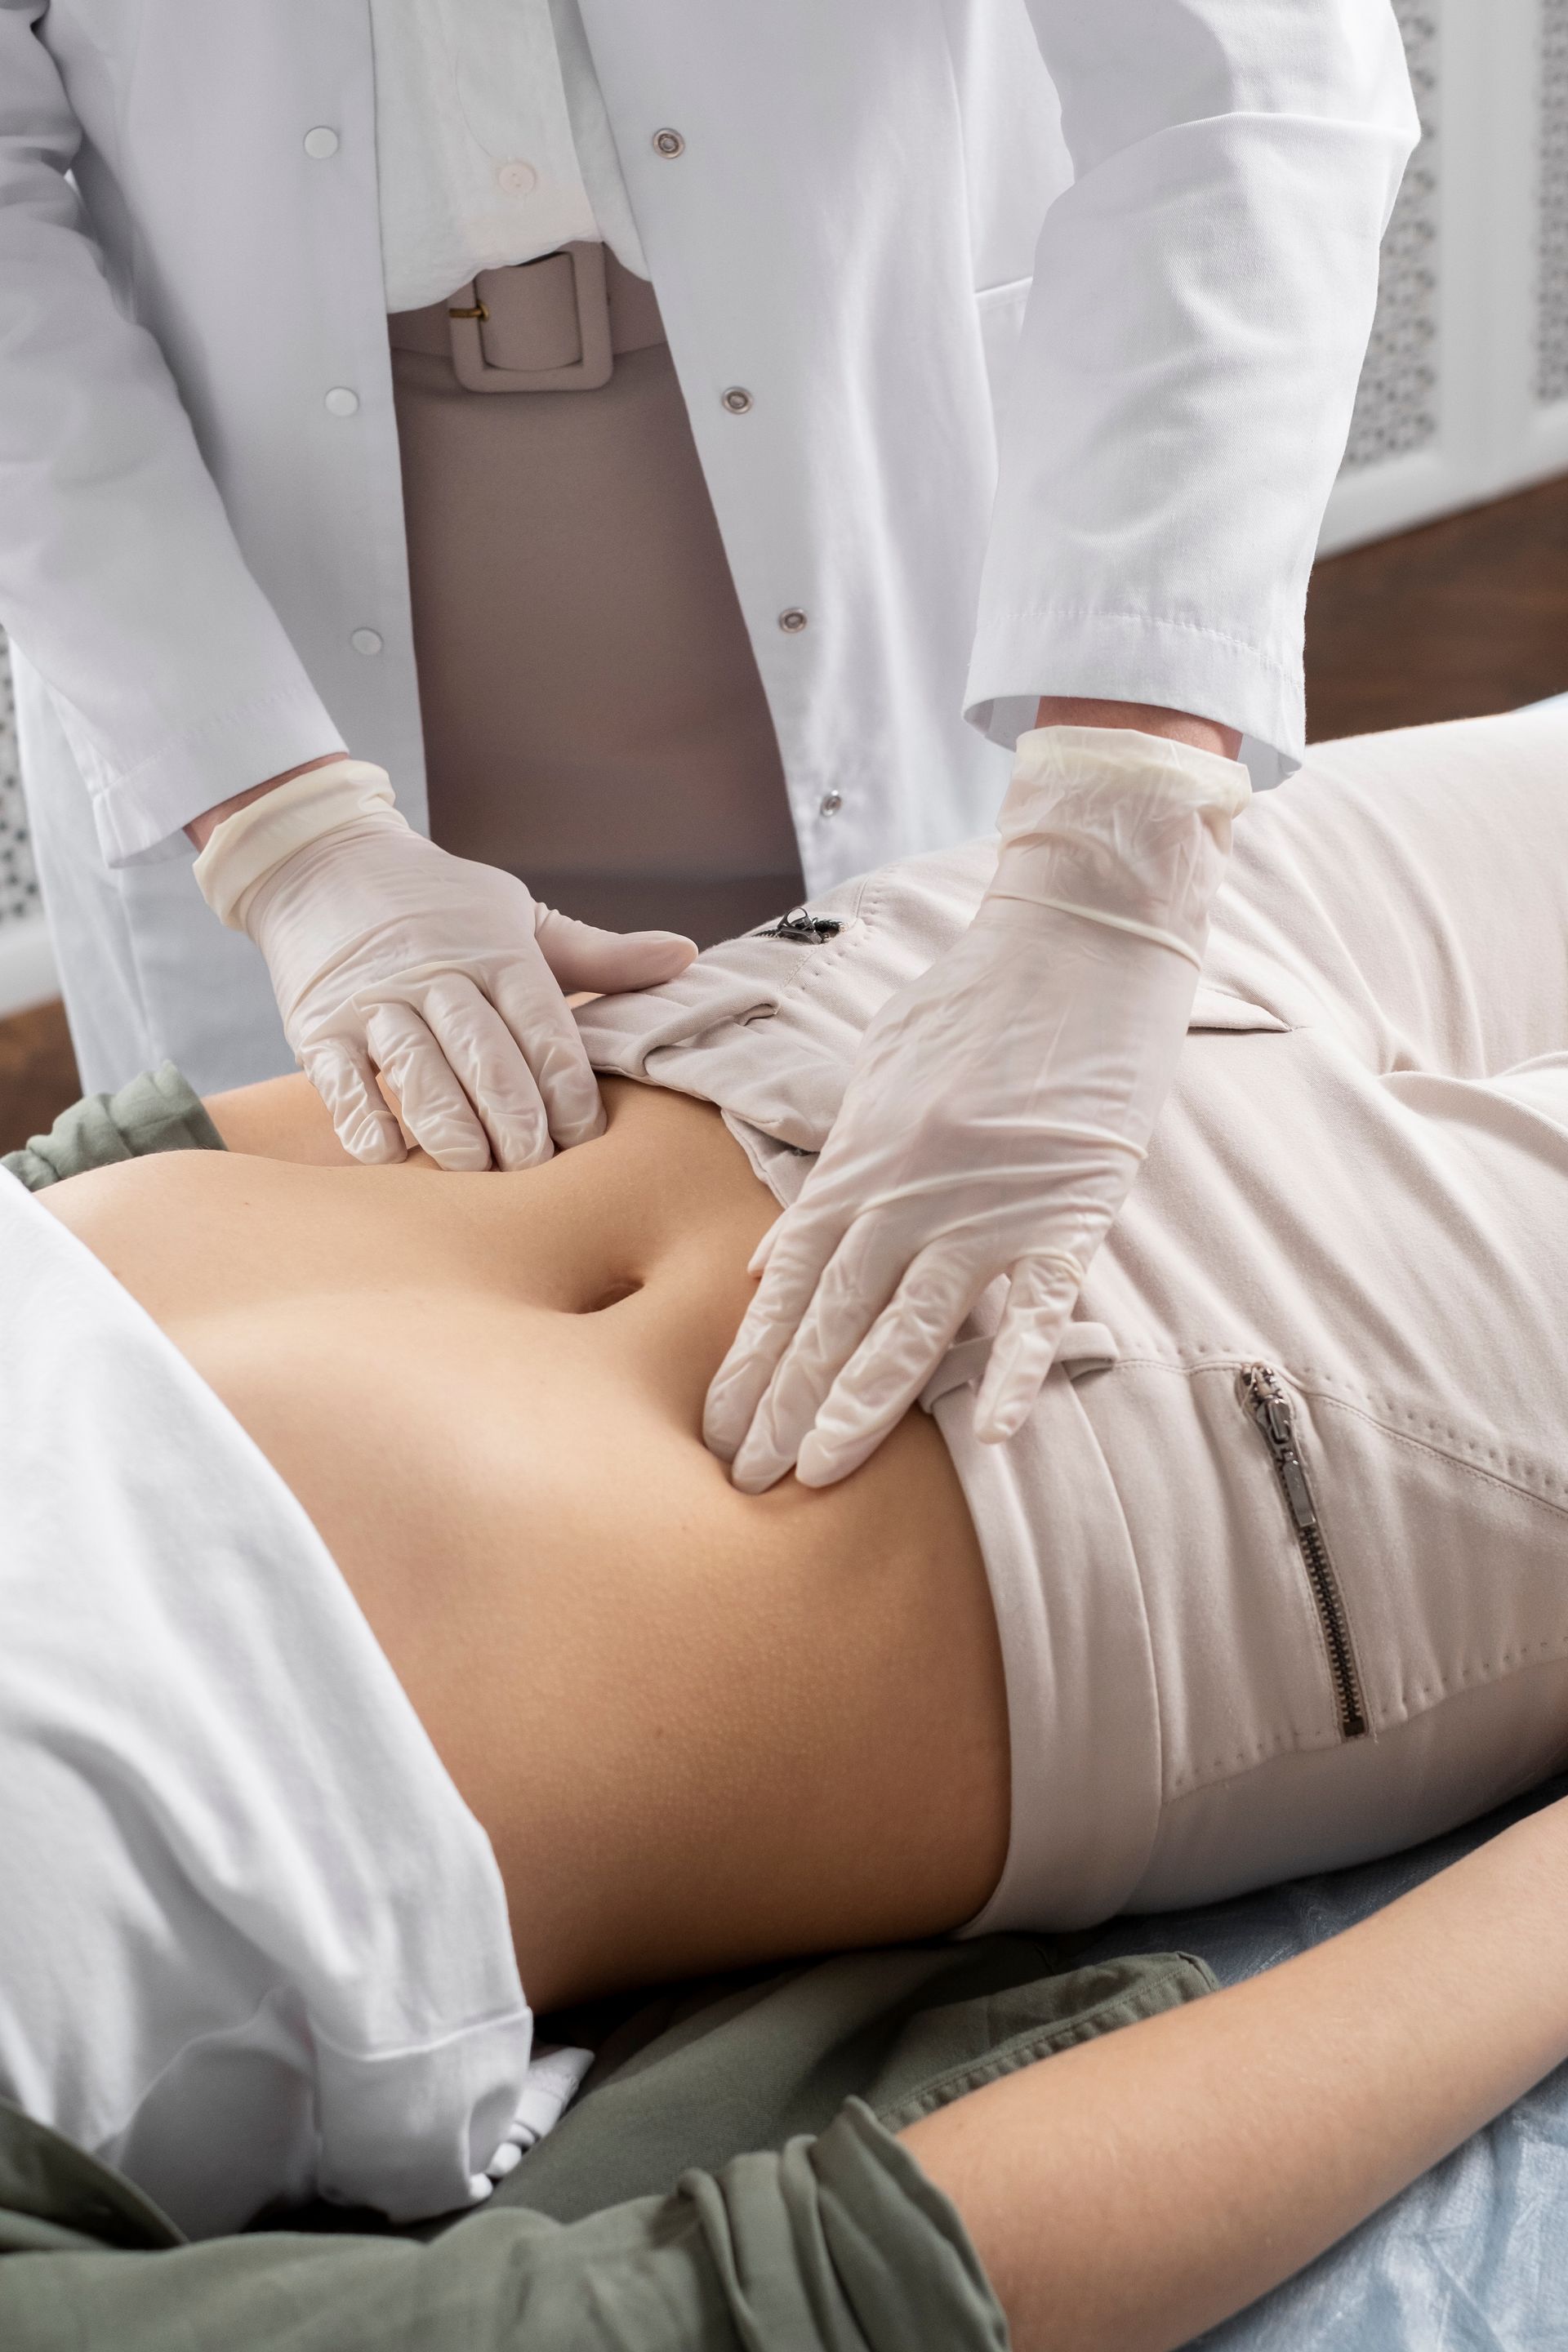 a woman is laying on a bed while a doctor examines her stomach .